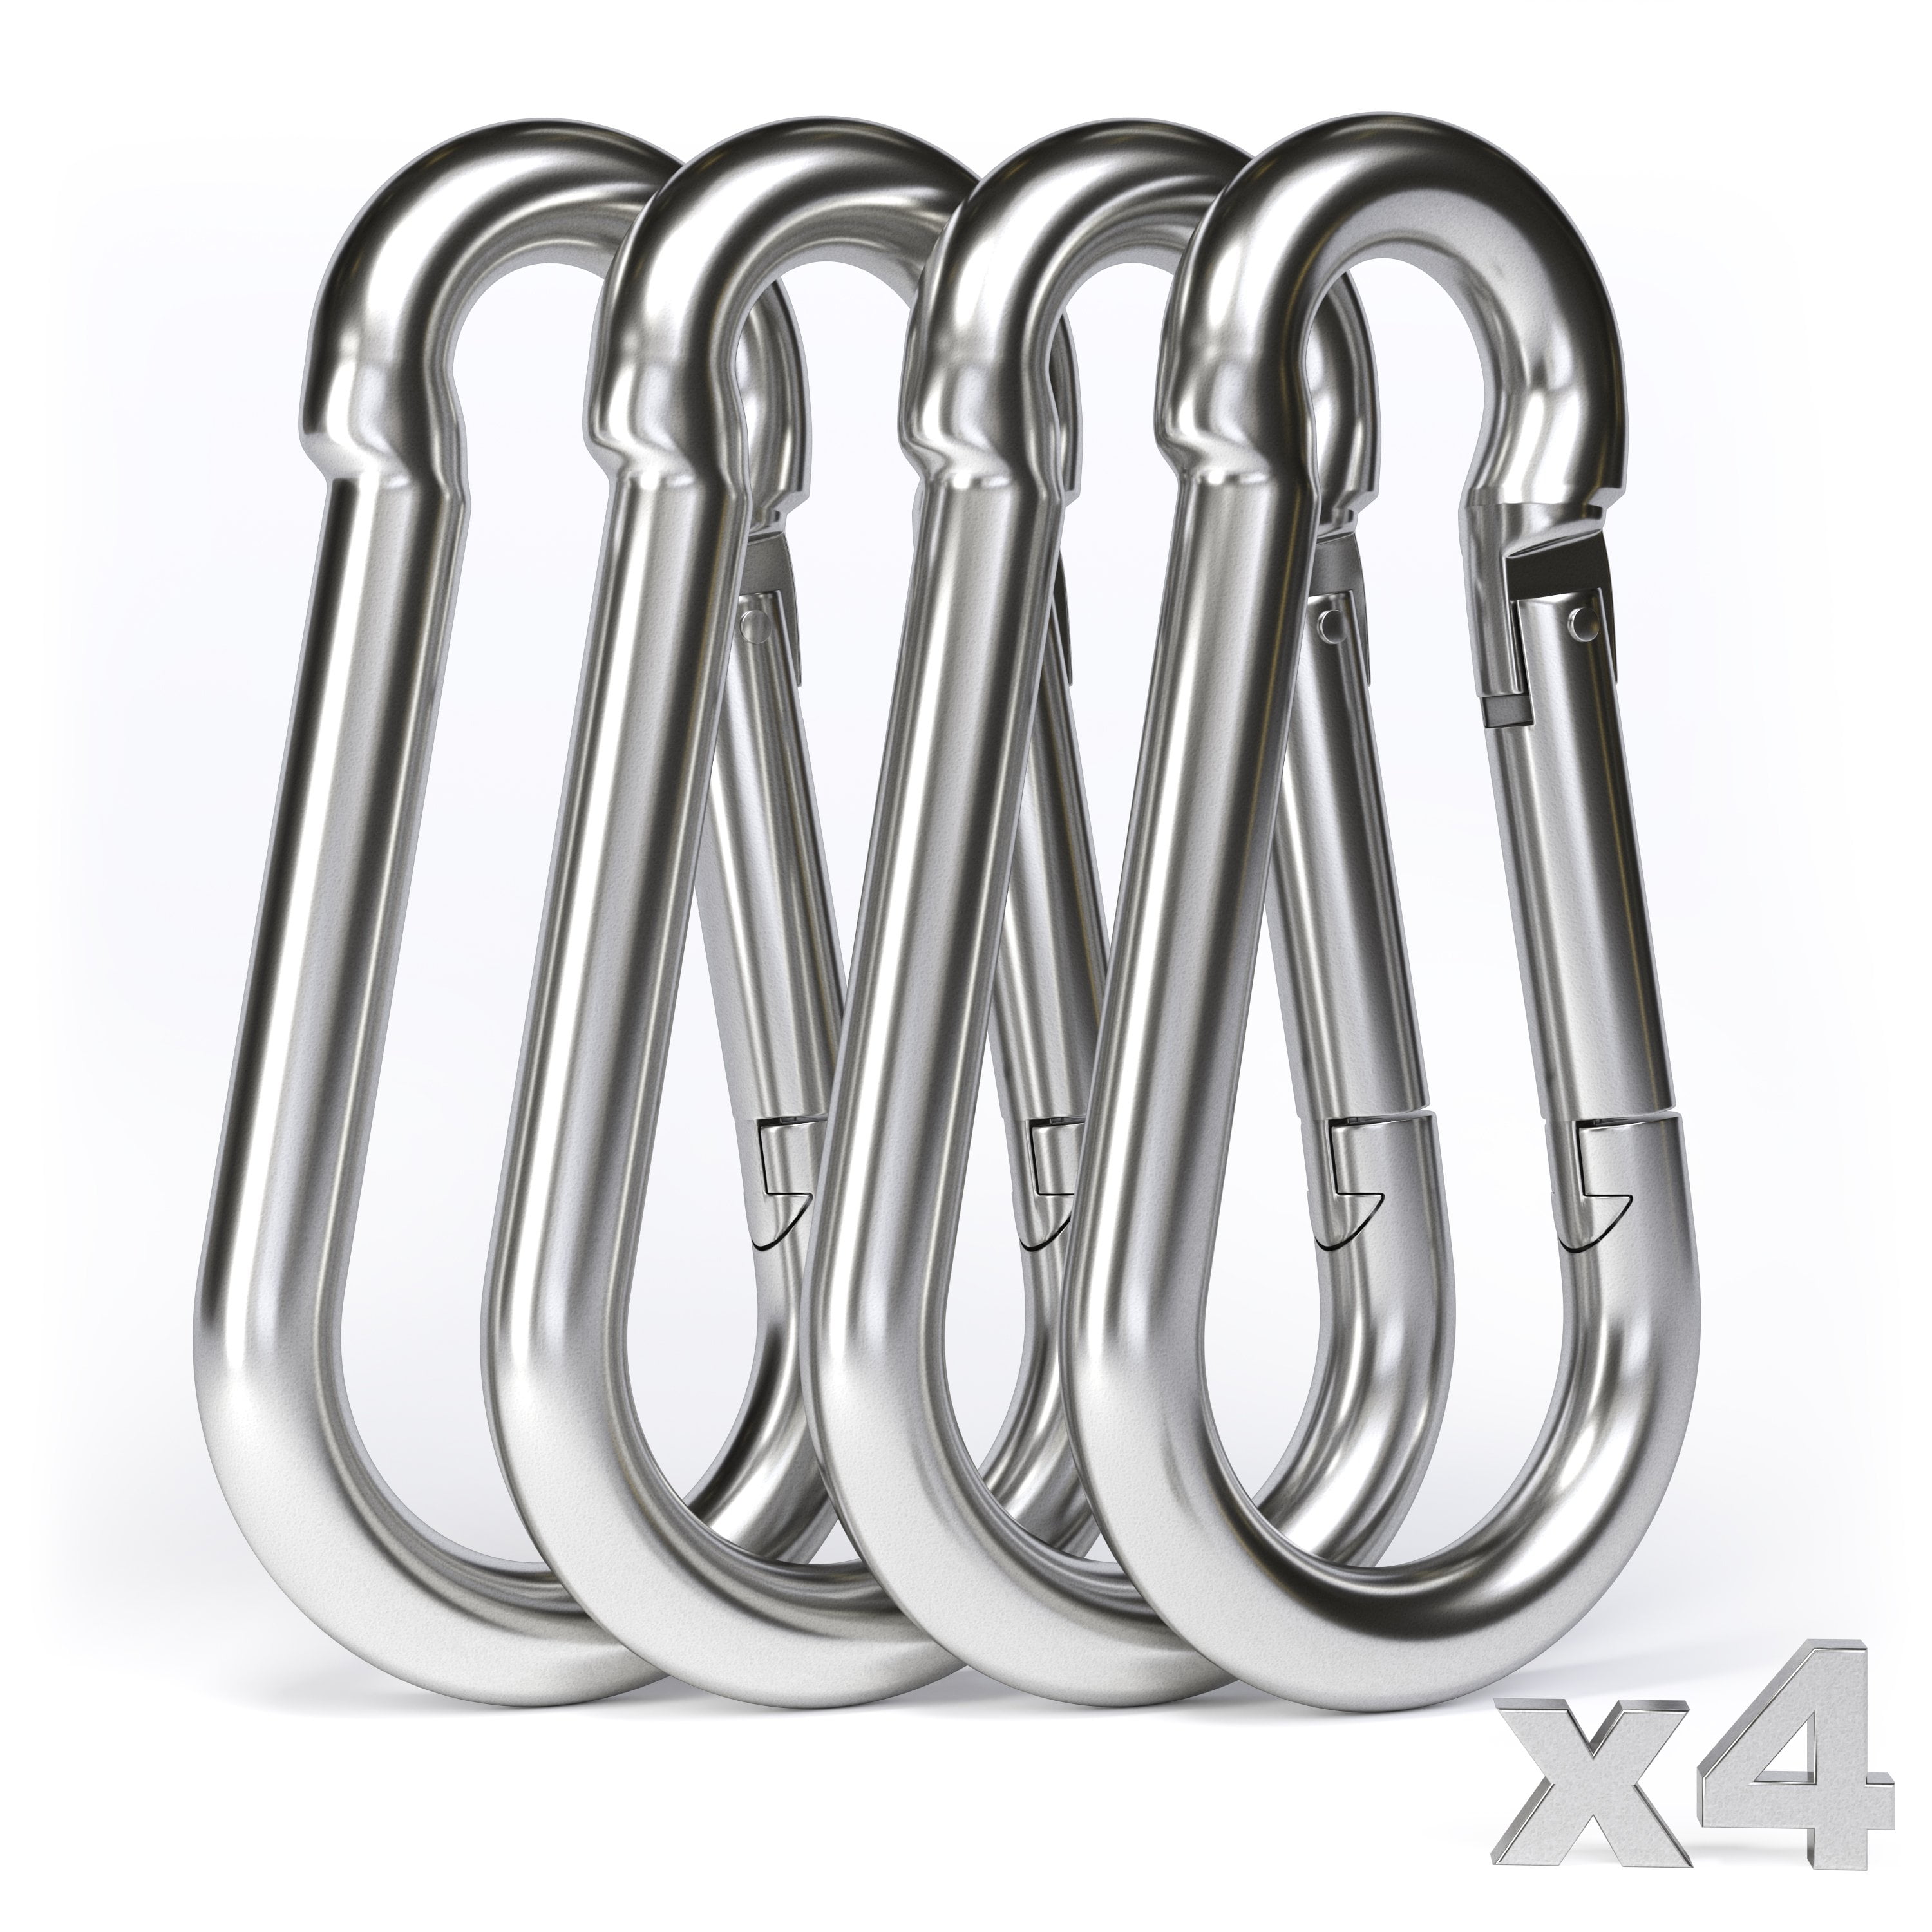 Buy 1 get 2 free Outdoor Sports Screw Lock Clip Hook Carabiner for Camping 